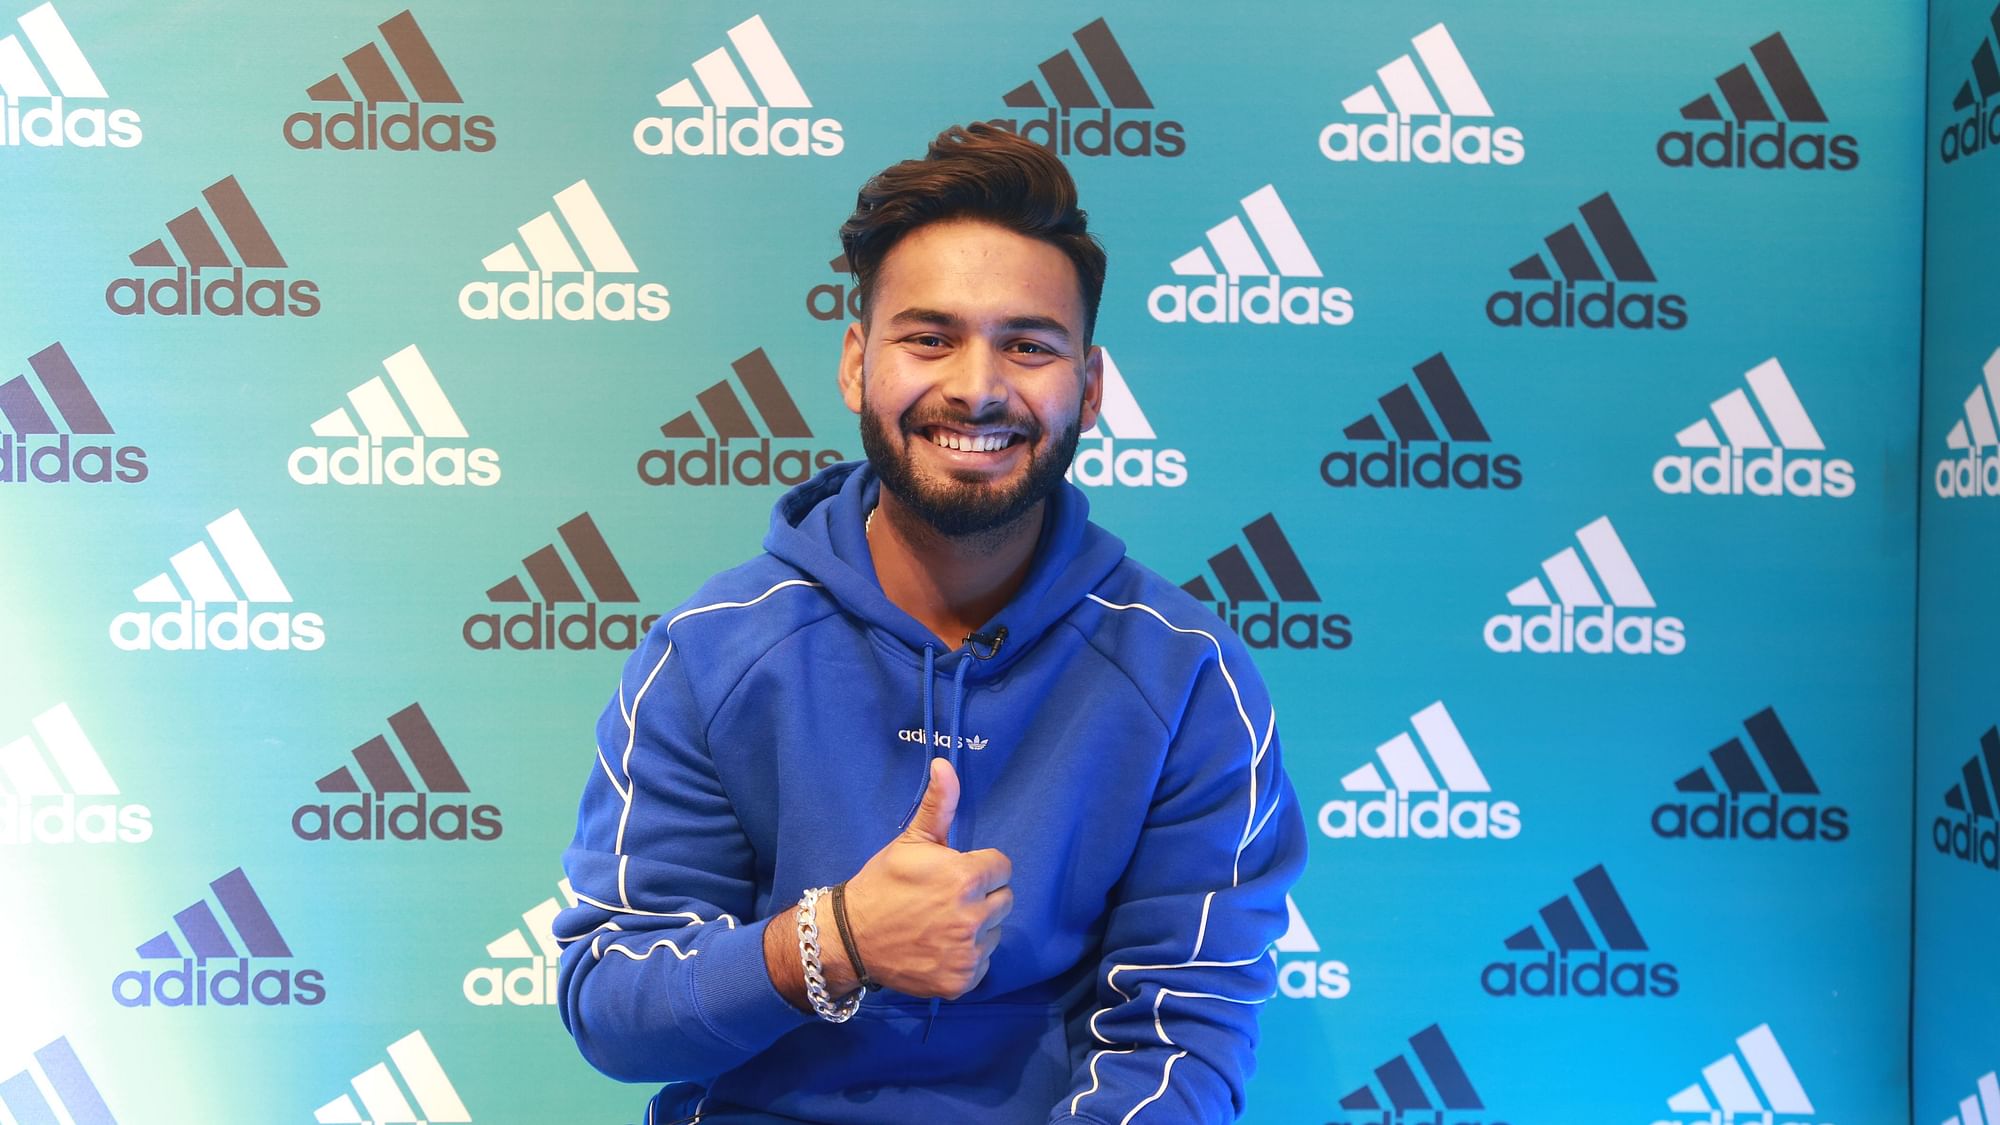 Indian cricketer Rishabh Pant spoke to The Quint ahead of the 2019 IPL.